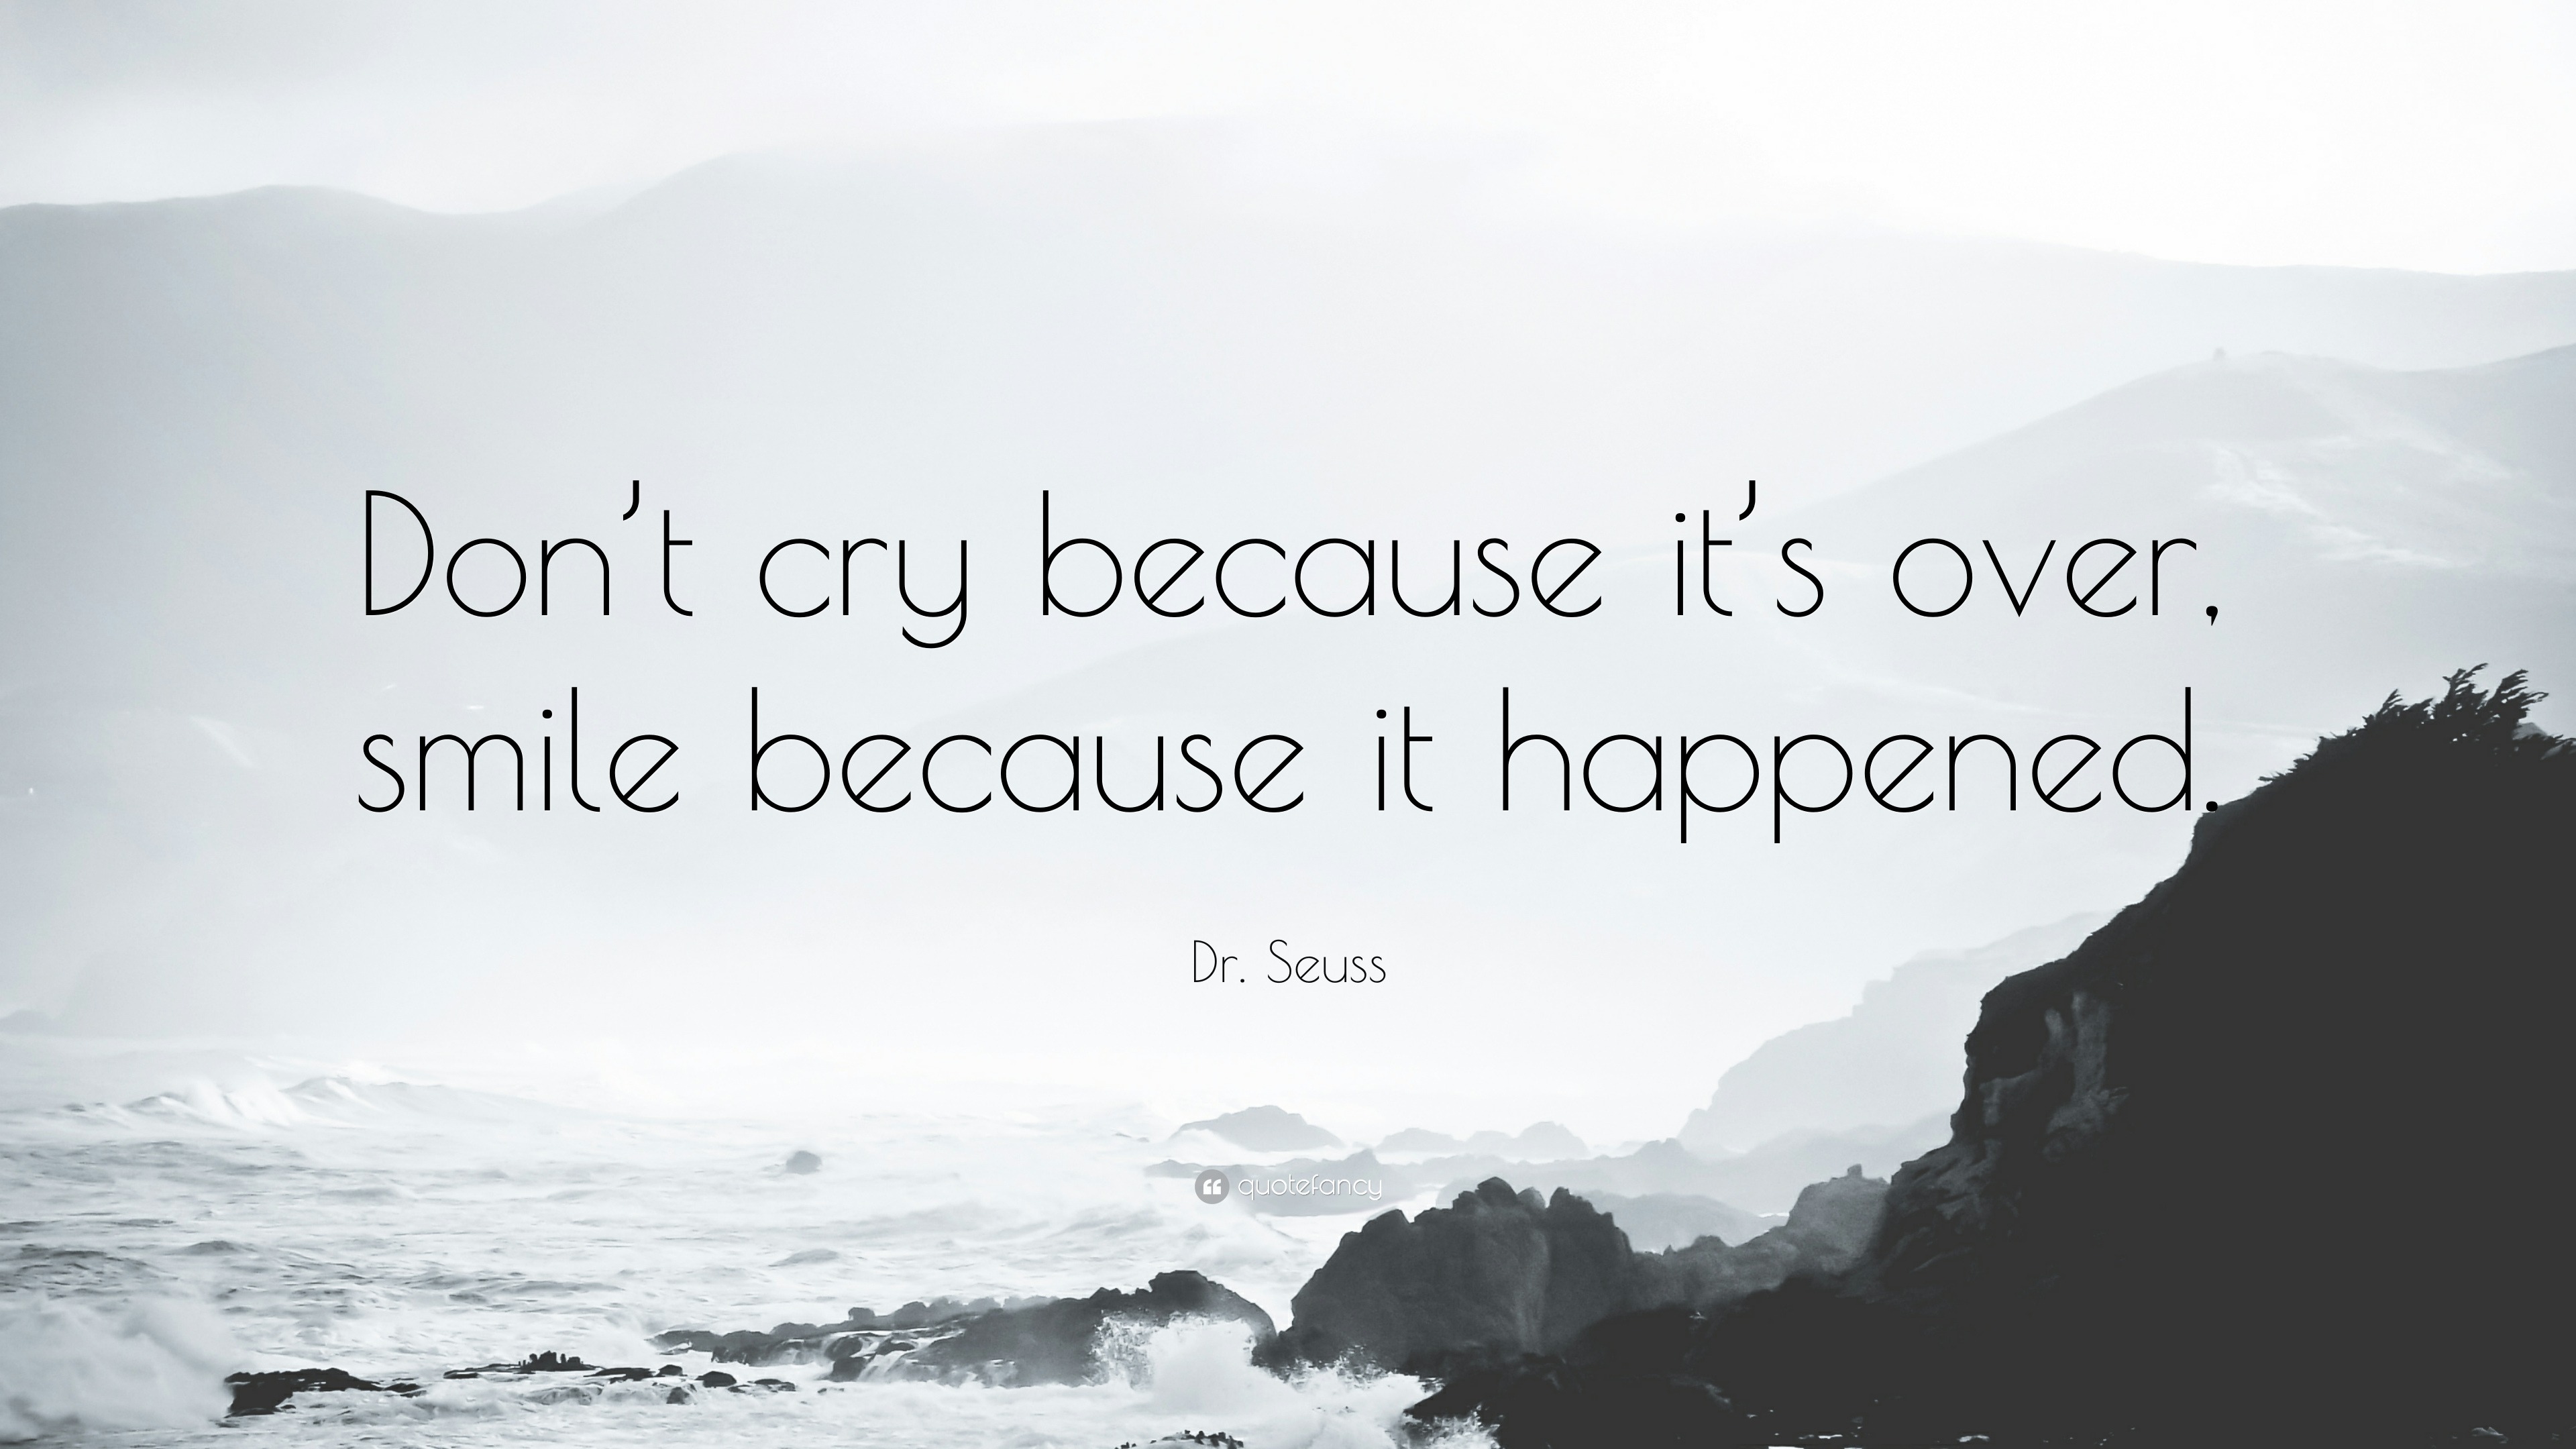 Dr. Seuss Quote: “Don’t cry because it’s over, smile because it